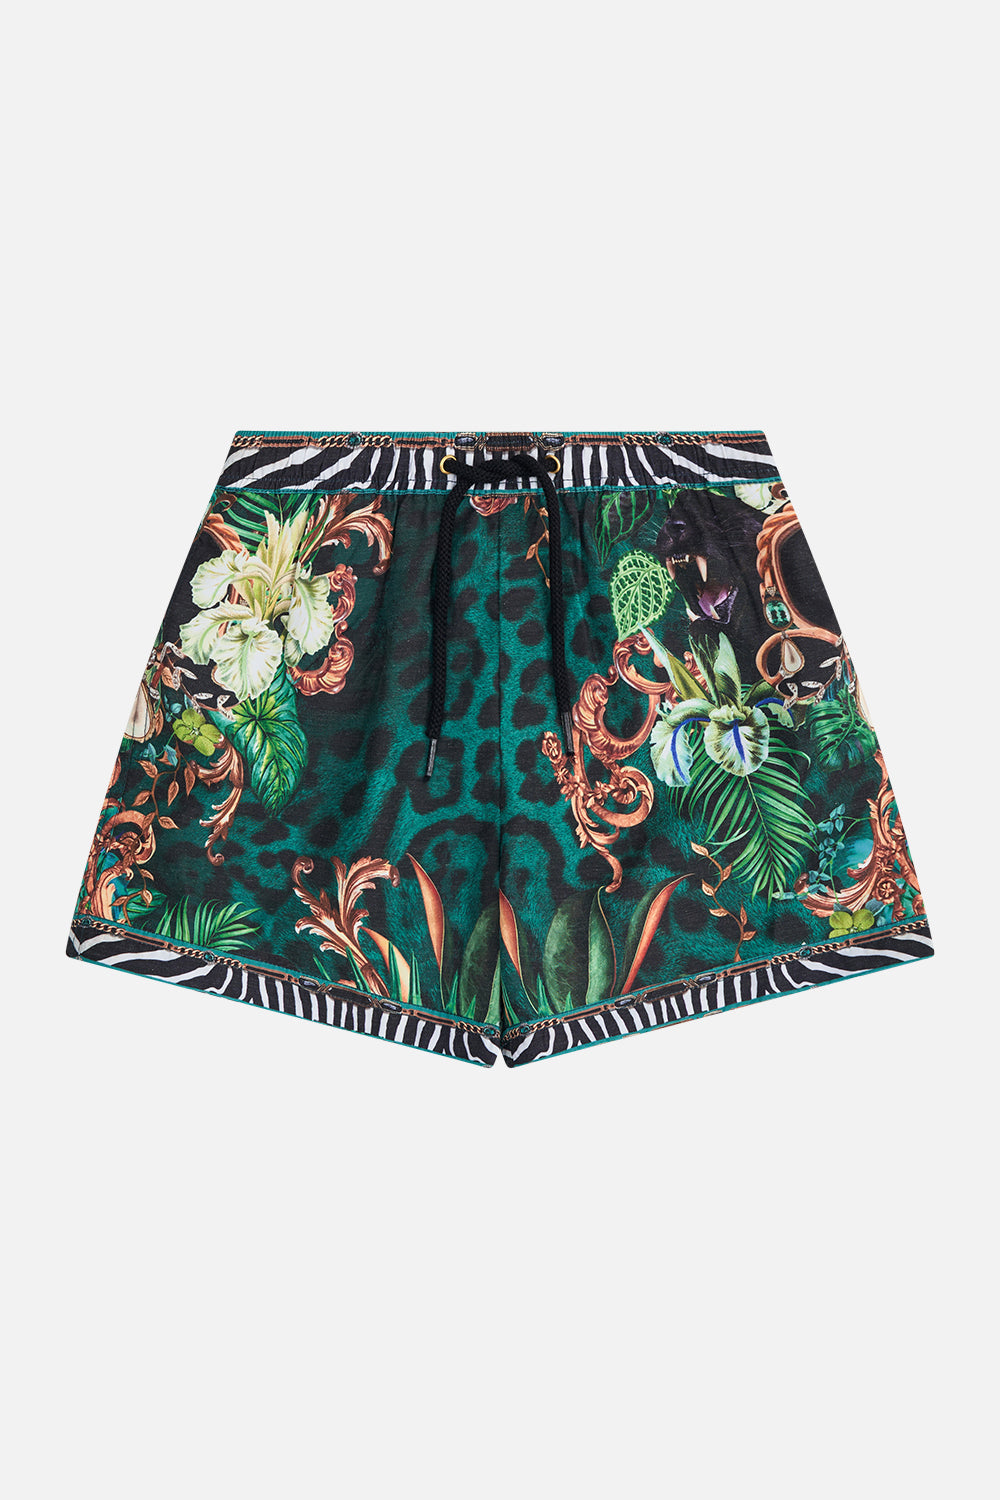 Product view of MILLA By CAMILLA kids board shorts in Sing My Song print